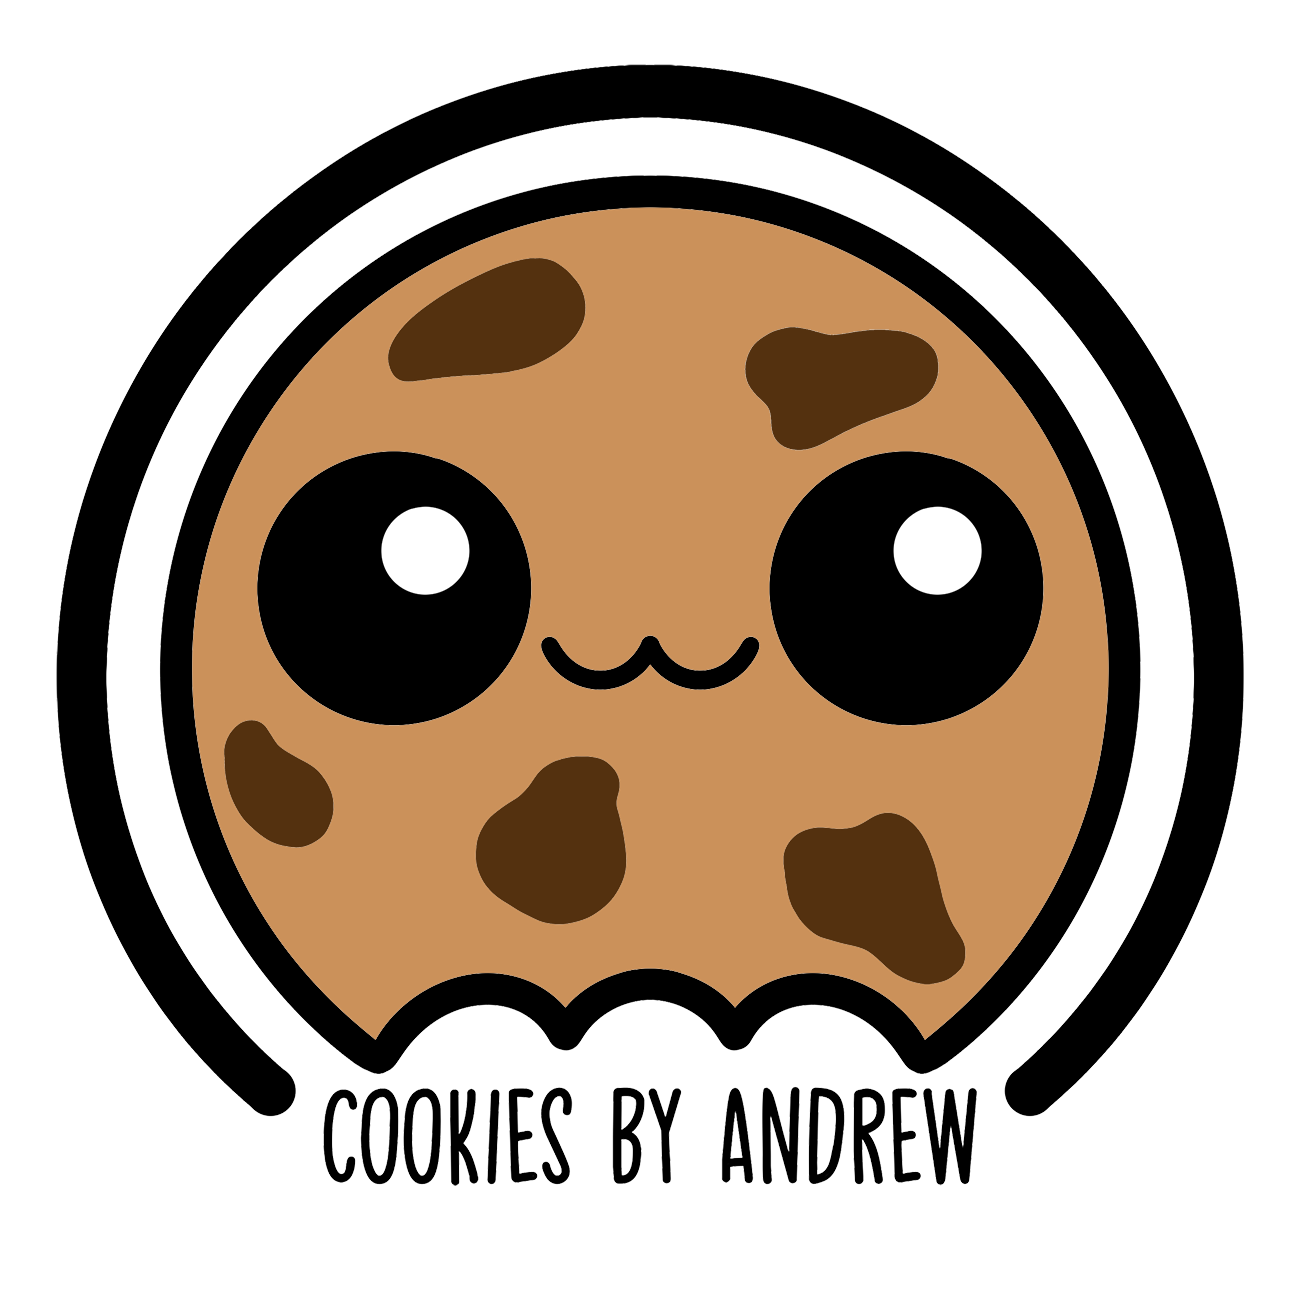 Cookies by Andrew